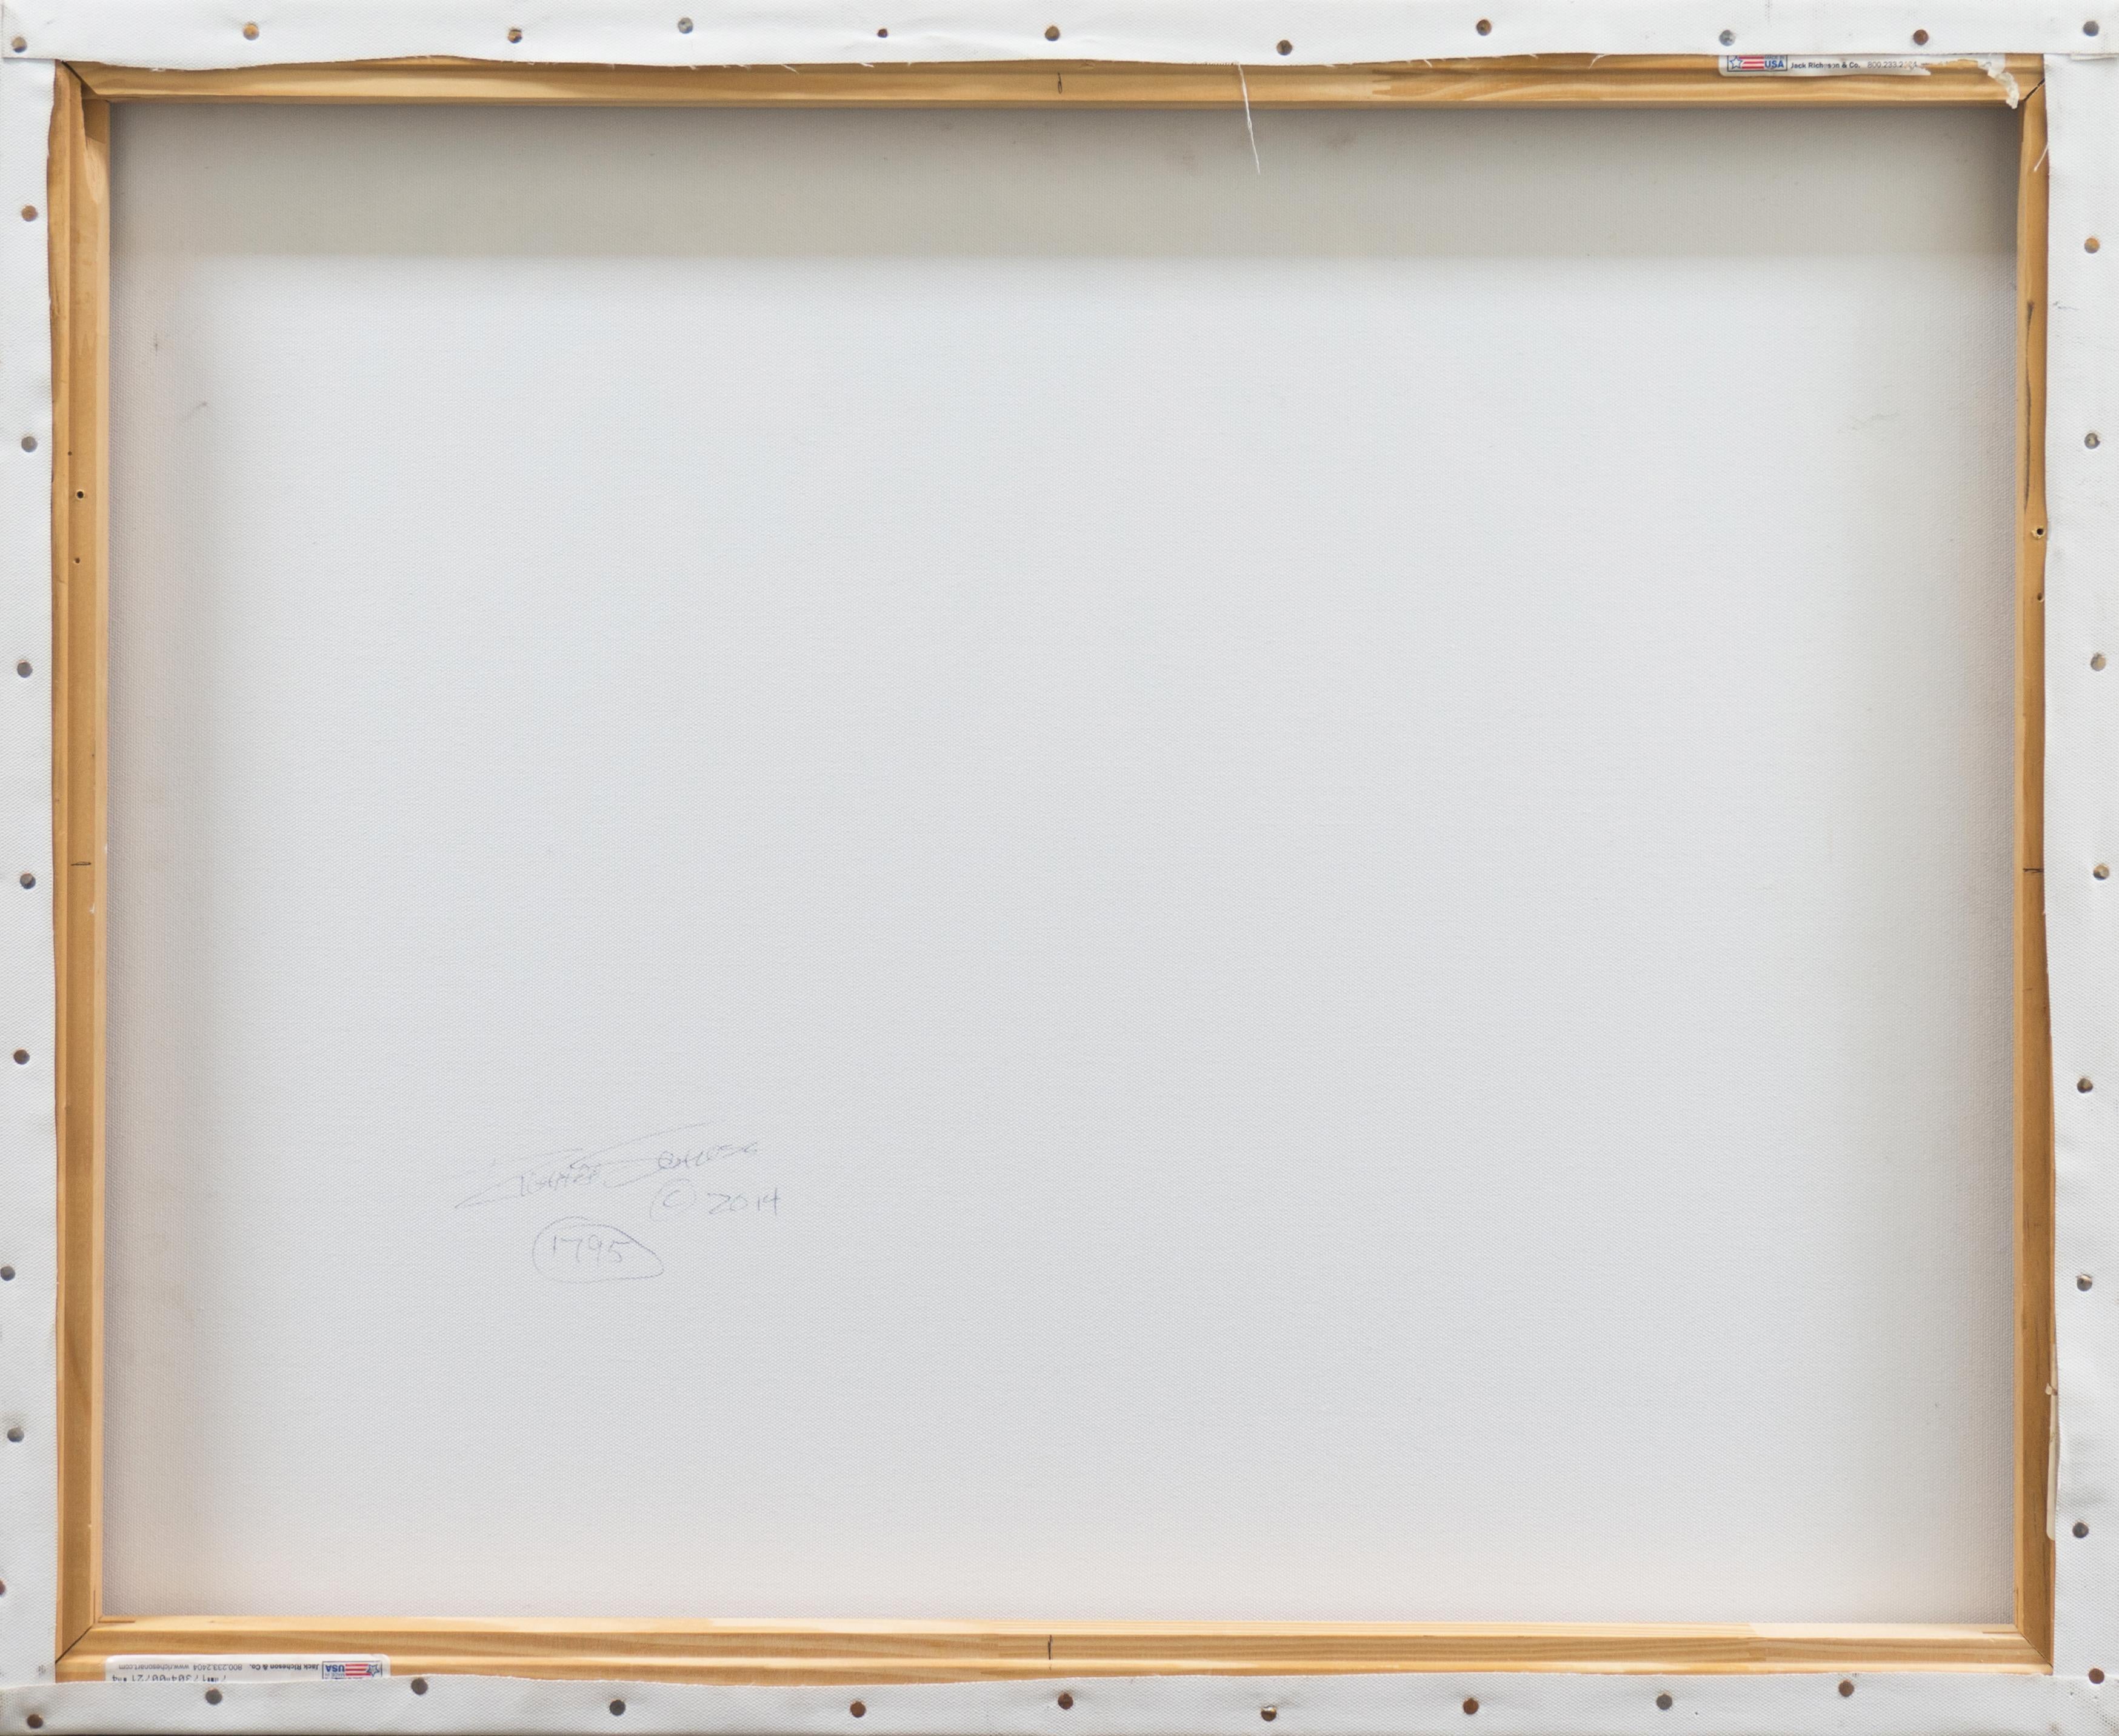 Signed lower right, 'R. Schloss' for Richard Schloss (American, born 1953) and dated 2014; additionally signed, dated and inscribed, verso. 

This notable California artist received his Master of Fine Arts in Painting at UCSB in 1979 with a  BA in